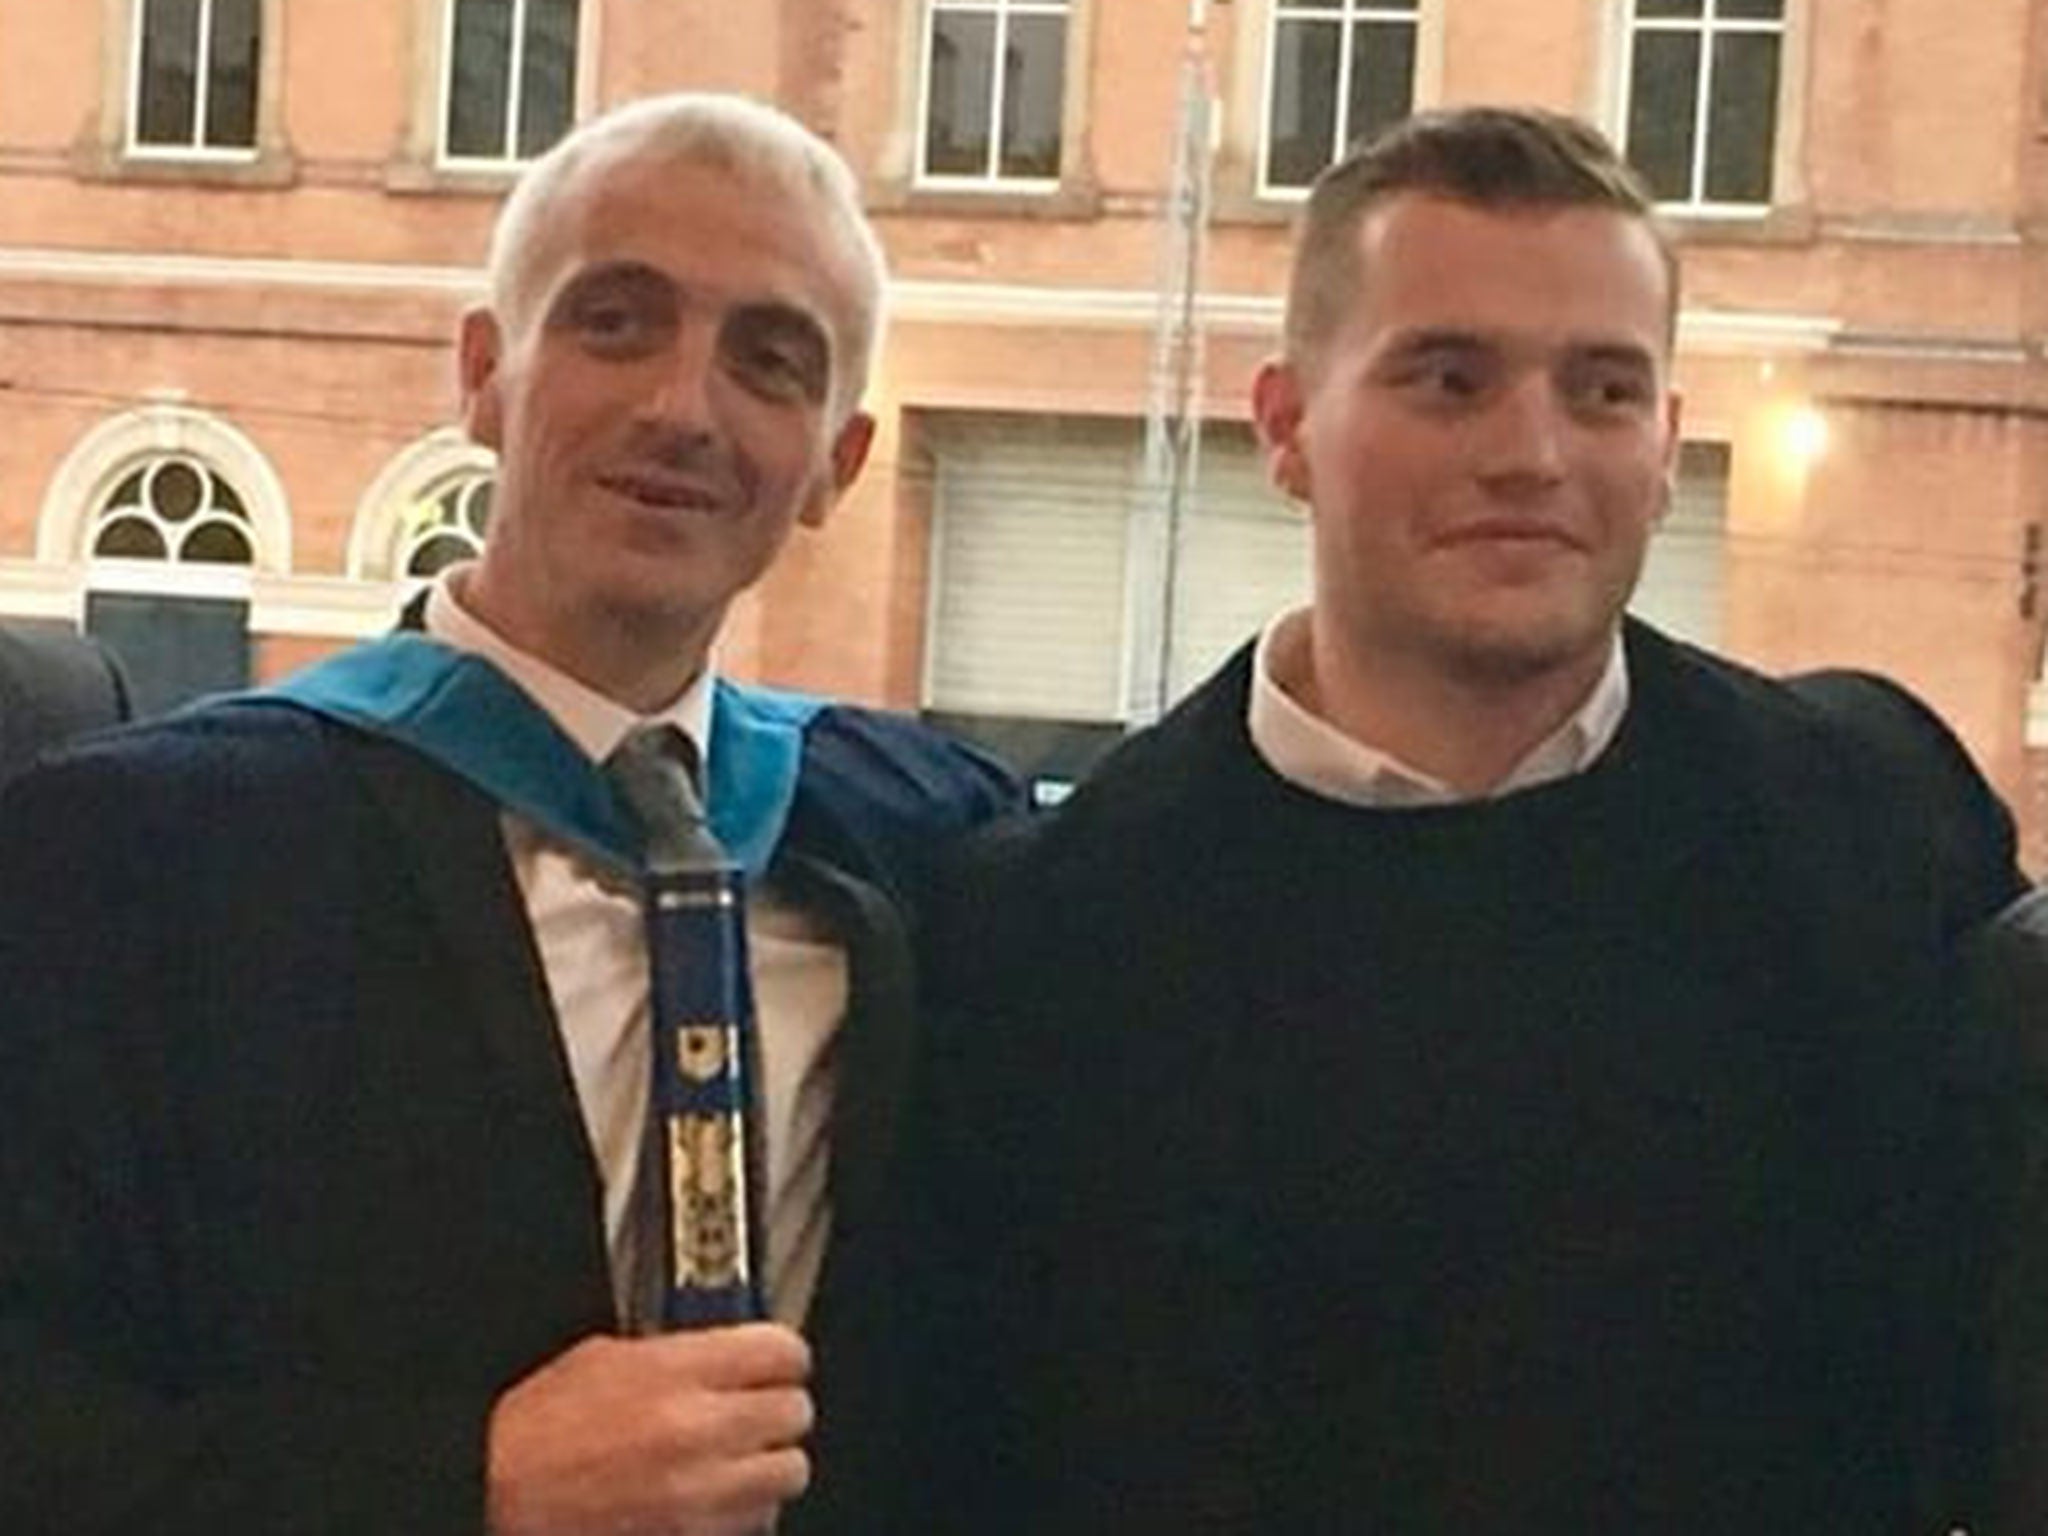 John Crilly with Jack Merritt at his university graduation in Manchester in September